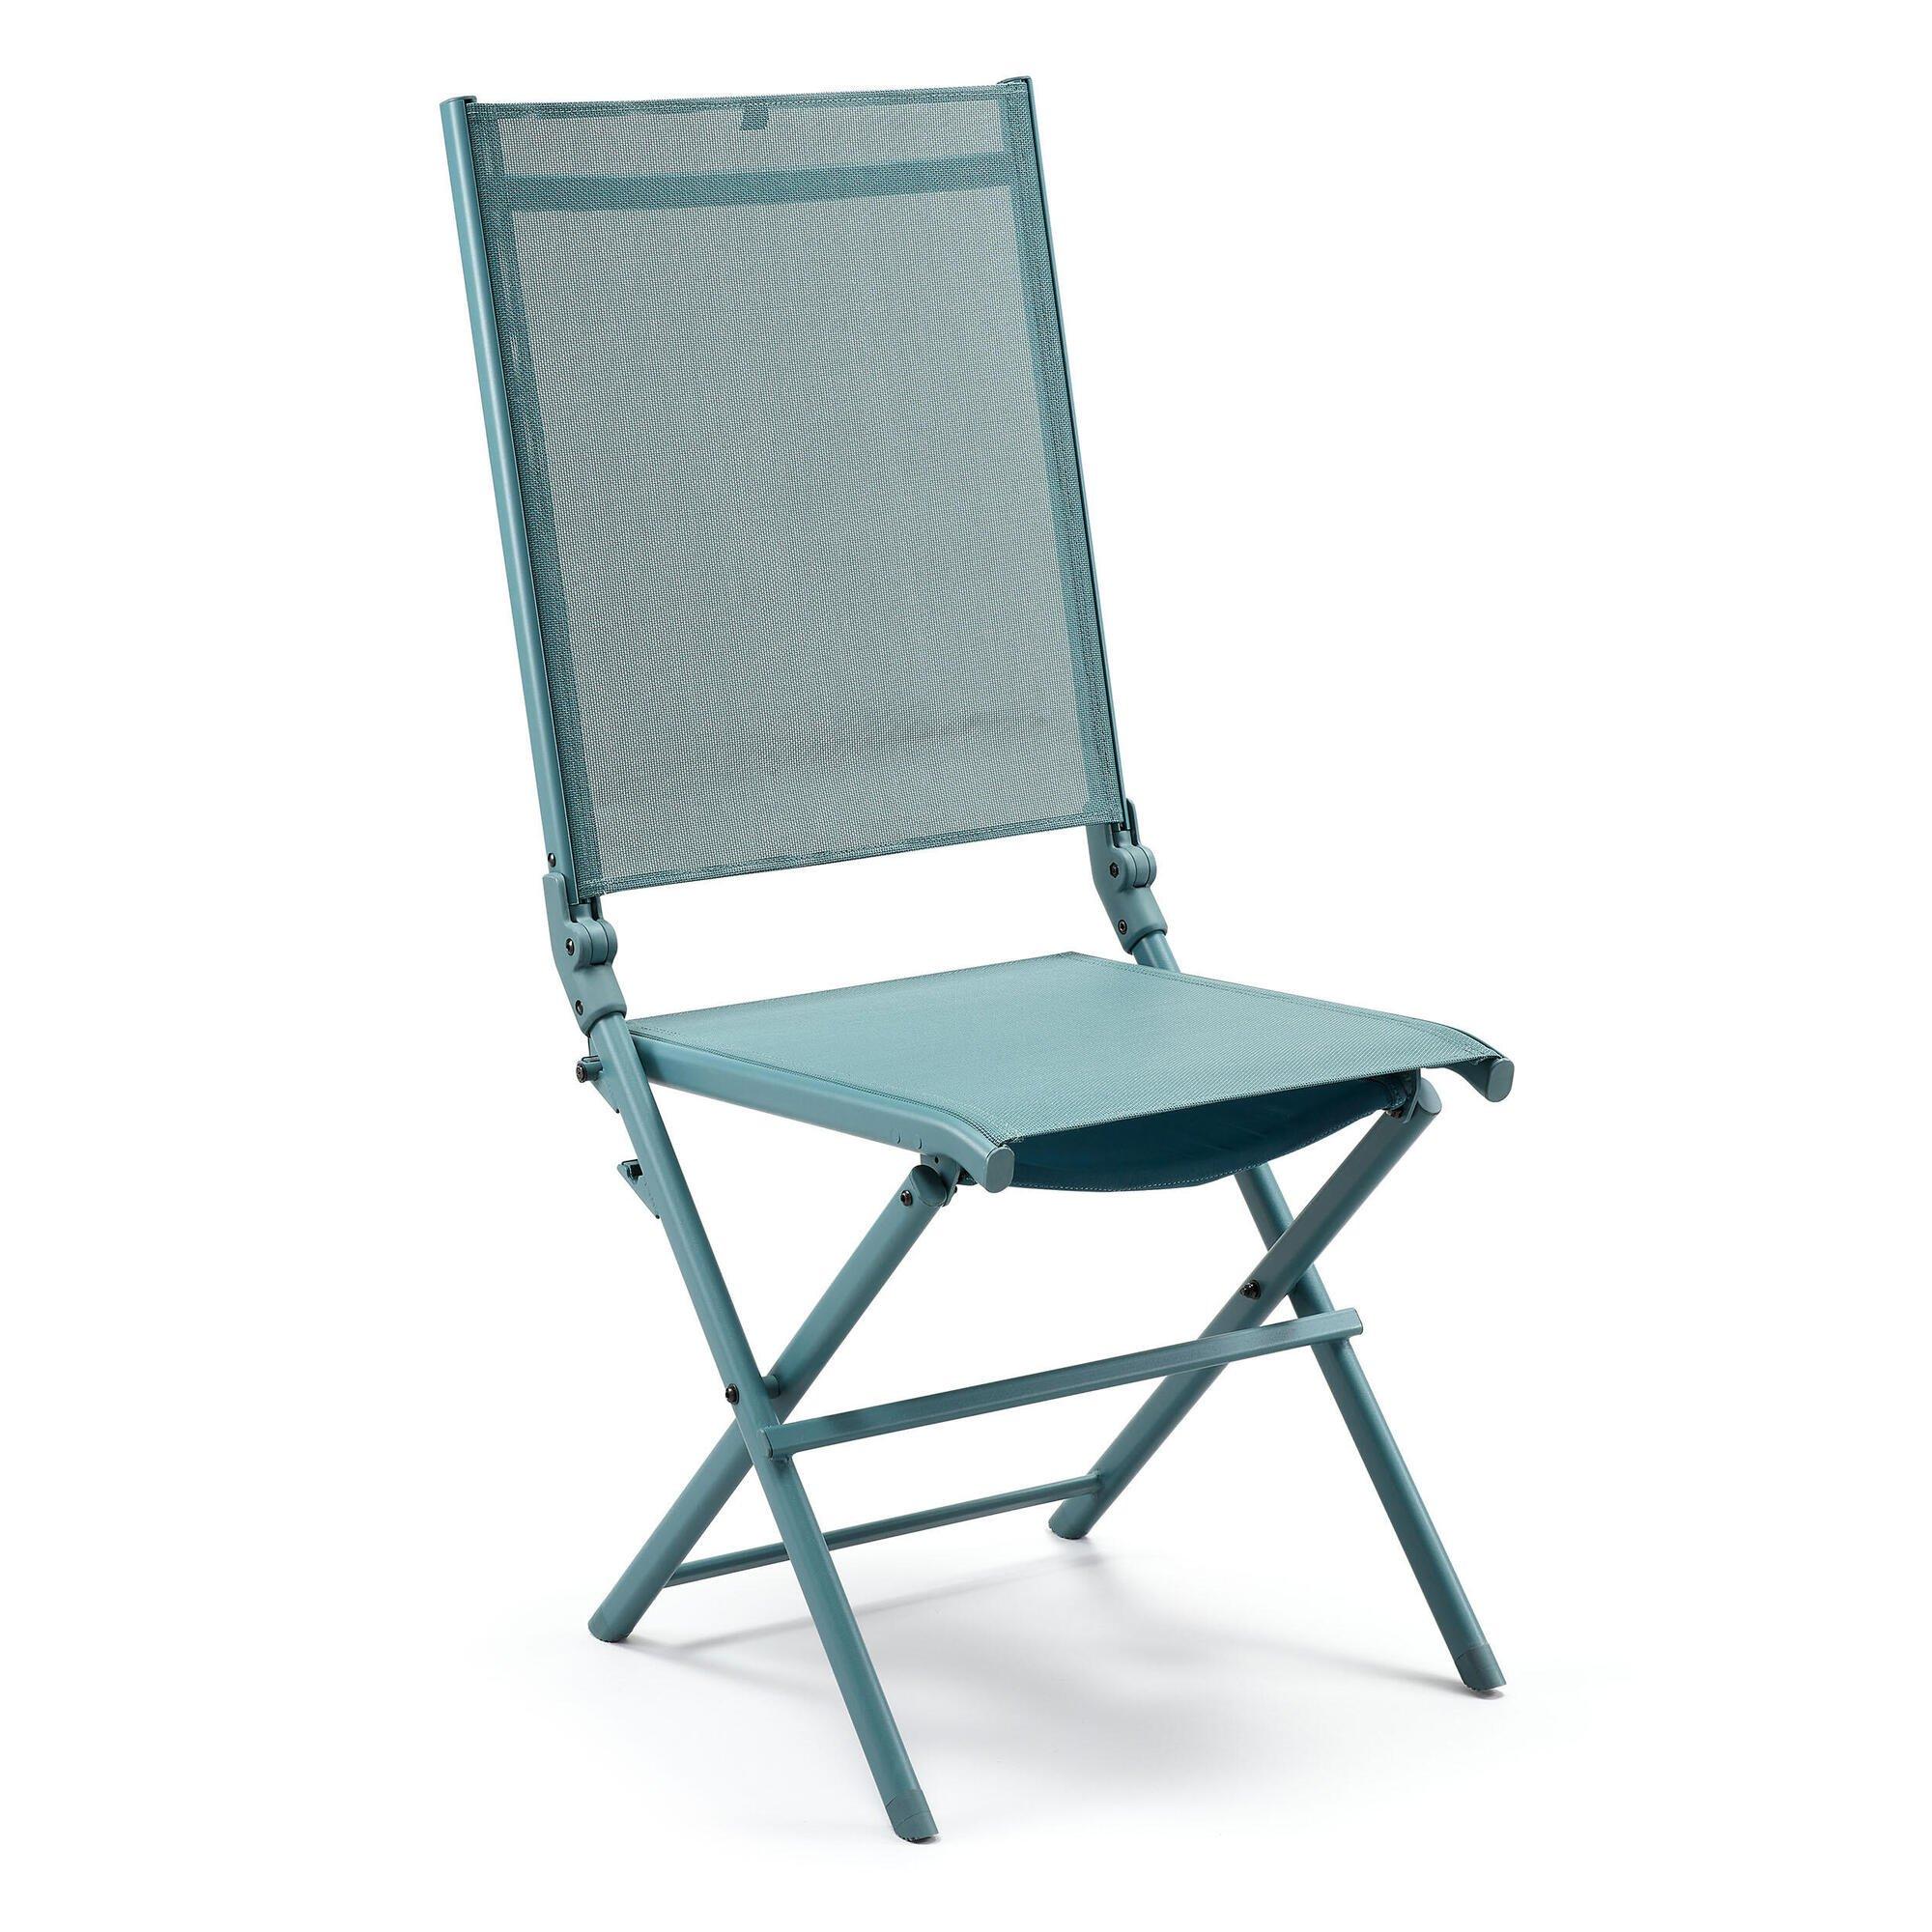 Decathlon Camping Double Position Comfort Chair